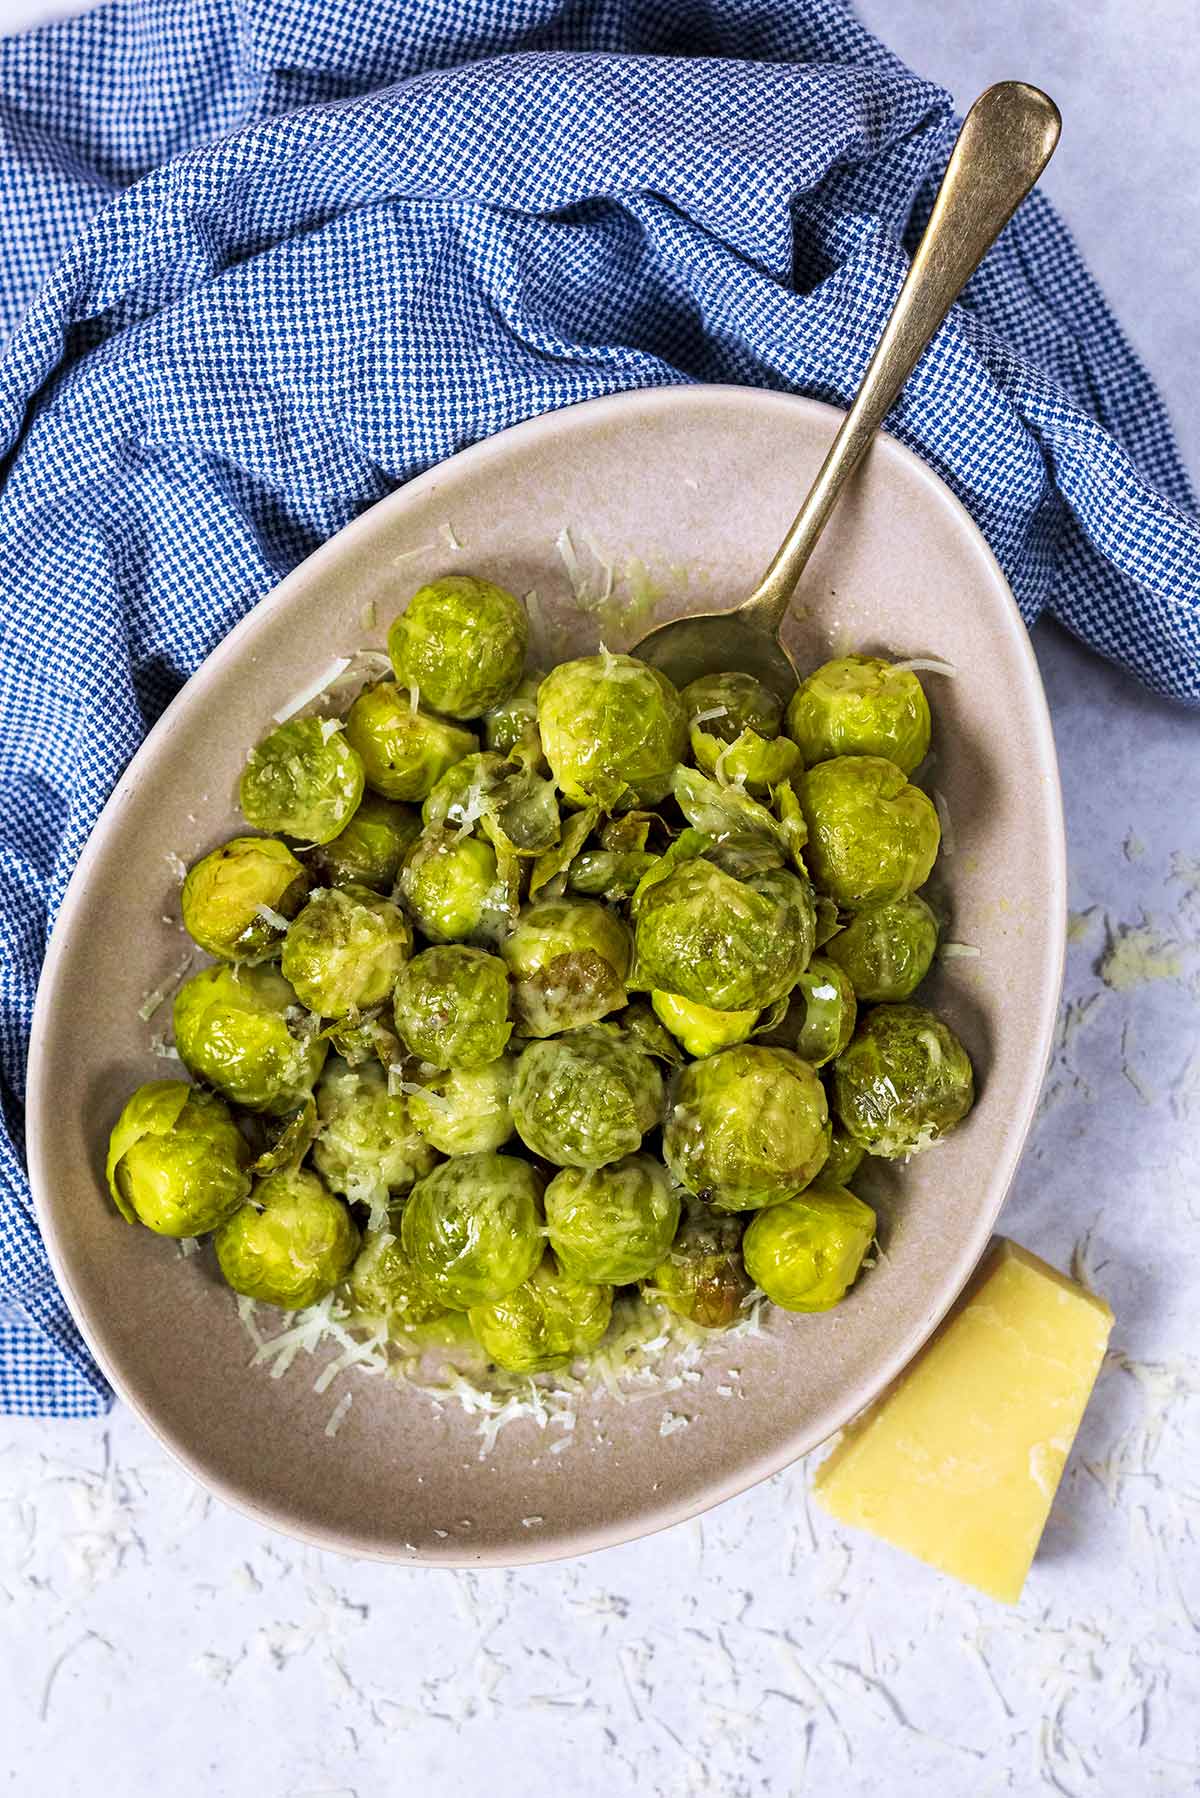 A bowl of Brussels sprouts with a spoon in front of a blue towel.